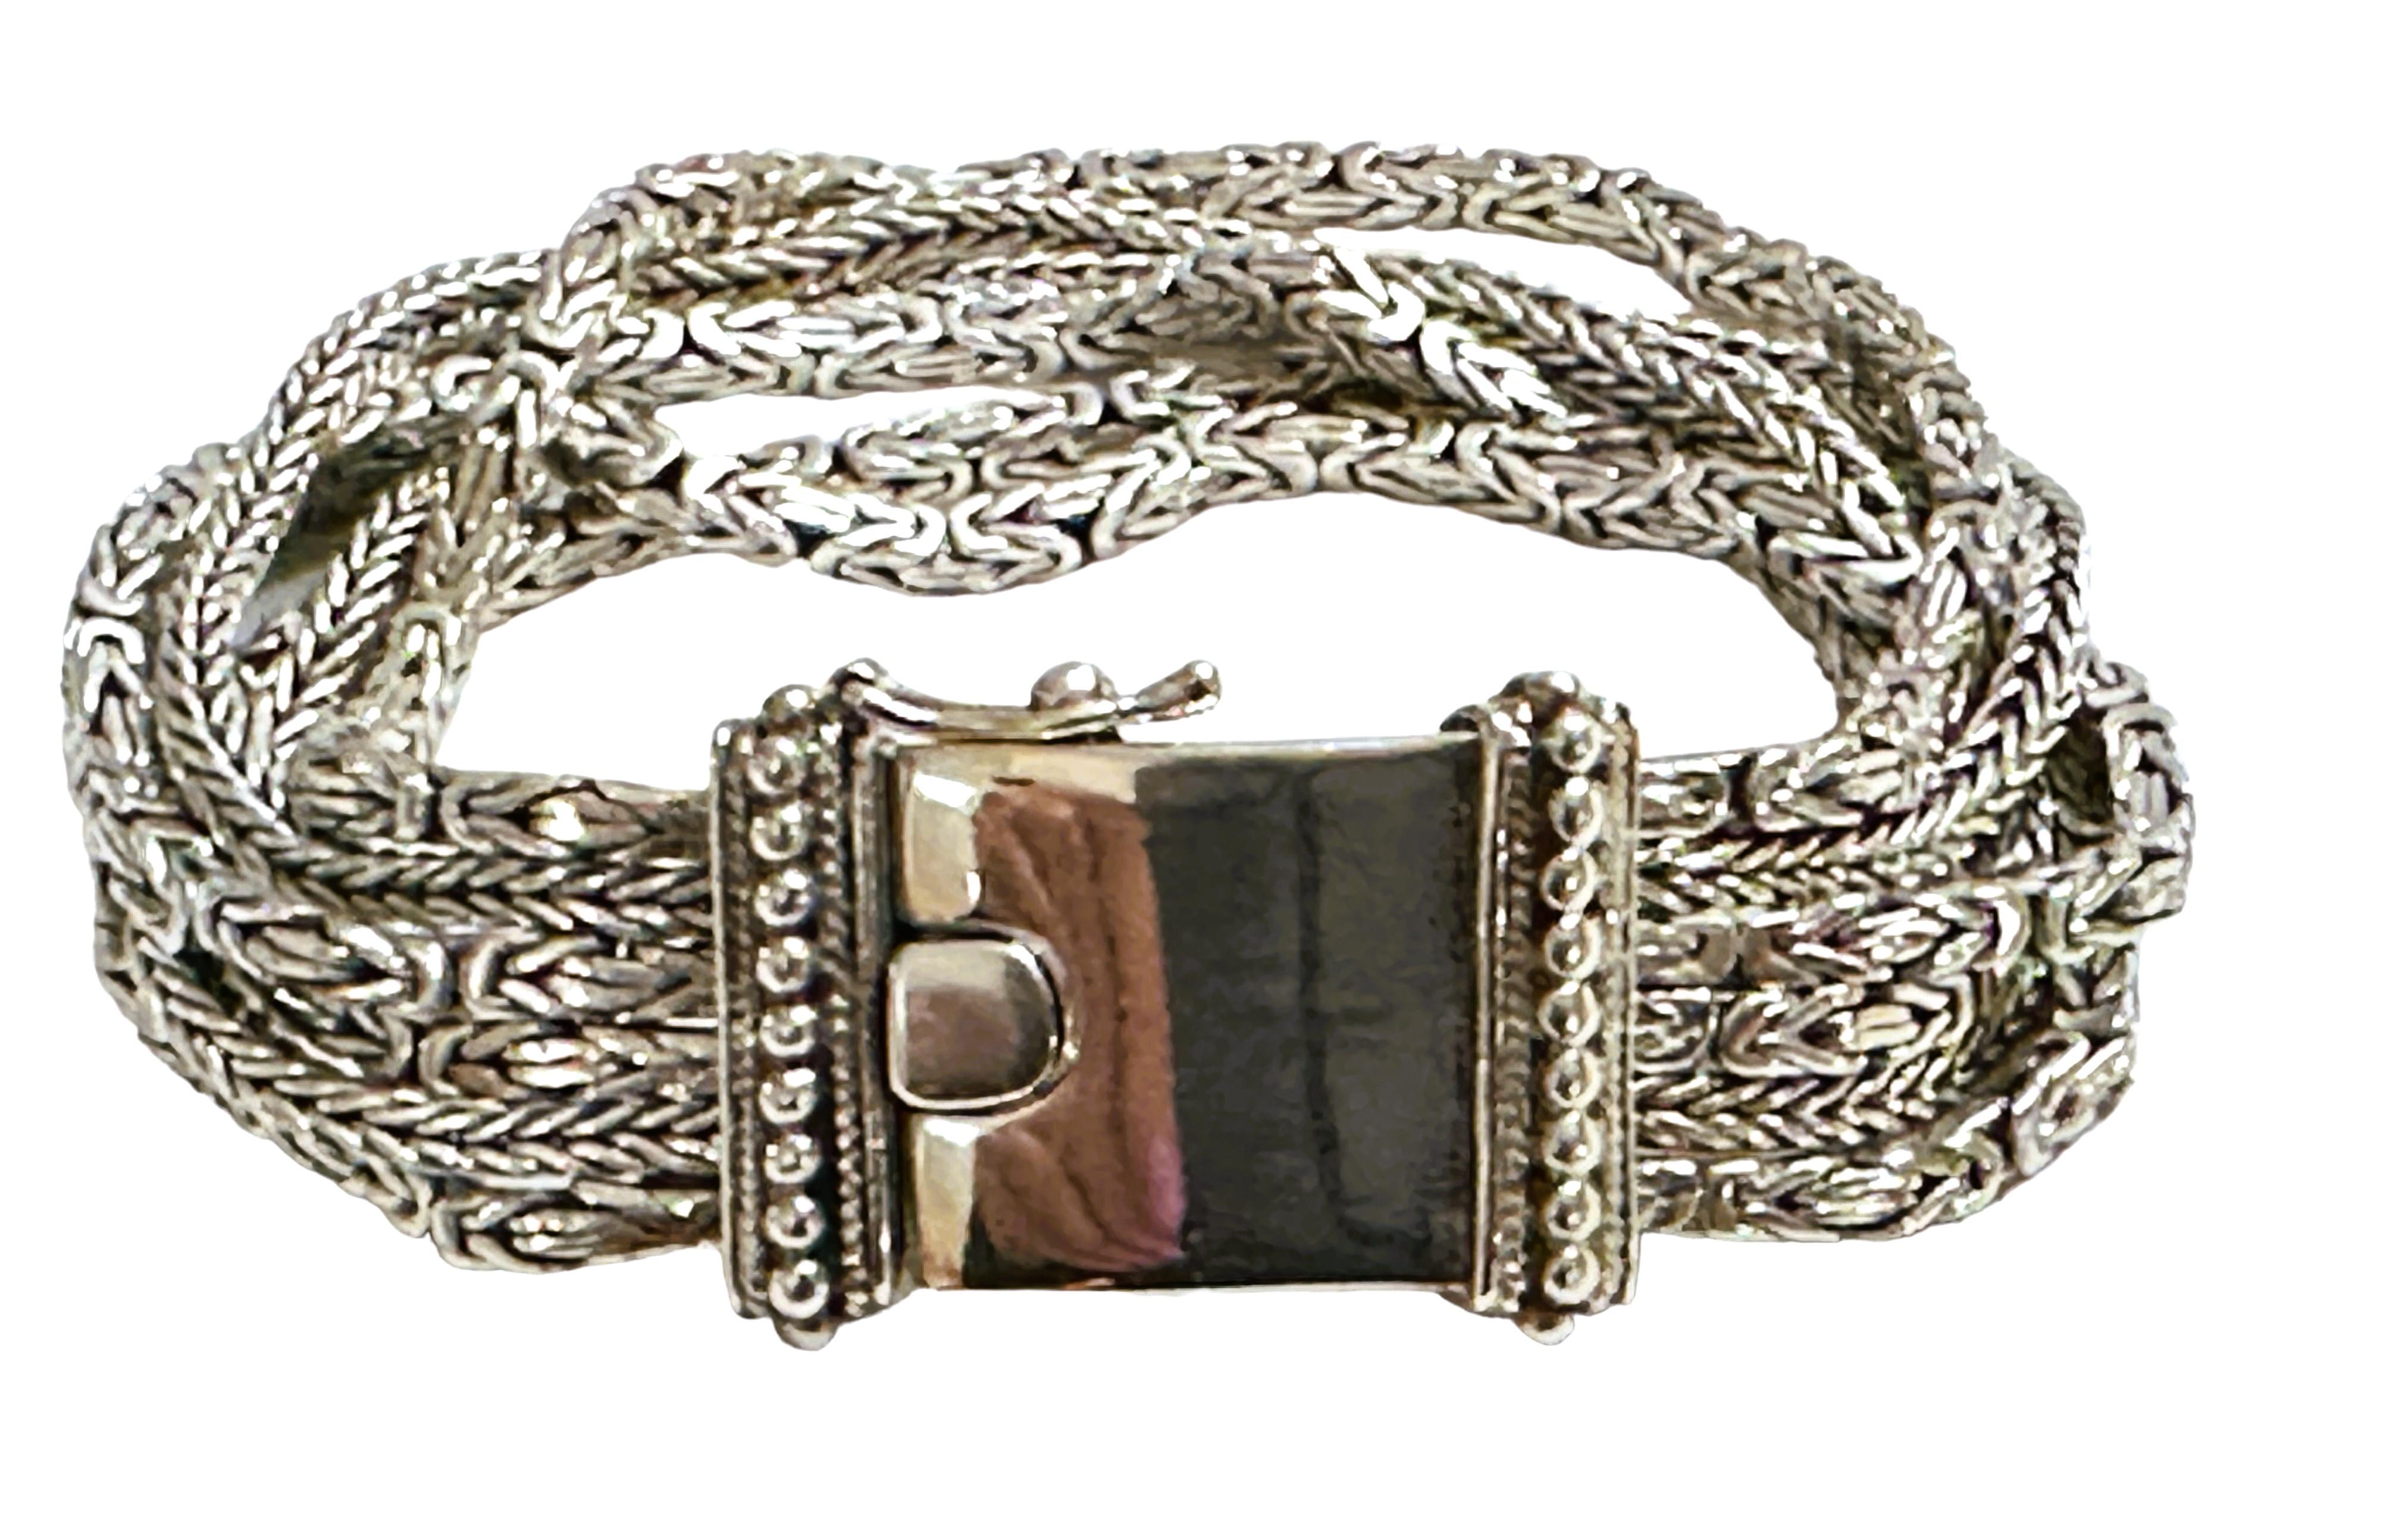 This is a pre-owned Sterling Silver Bracelet and it is in excellent condition..  The bracelet is 7.25 inches long and  .75 inches wide.  It has a nice sturdy box closure and a safety latch. This bracelet will surely get noticed.  It's truly the work